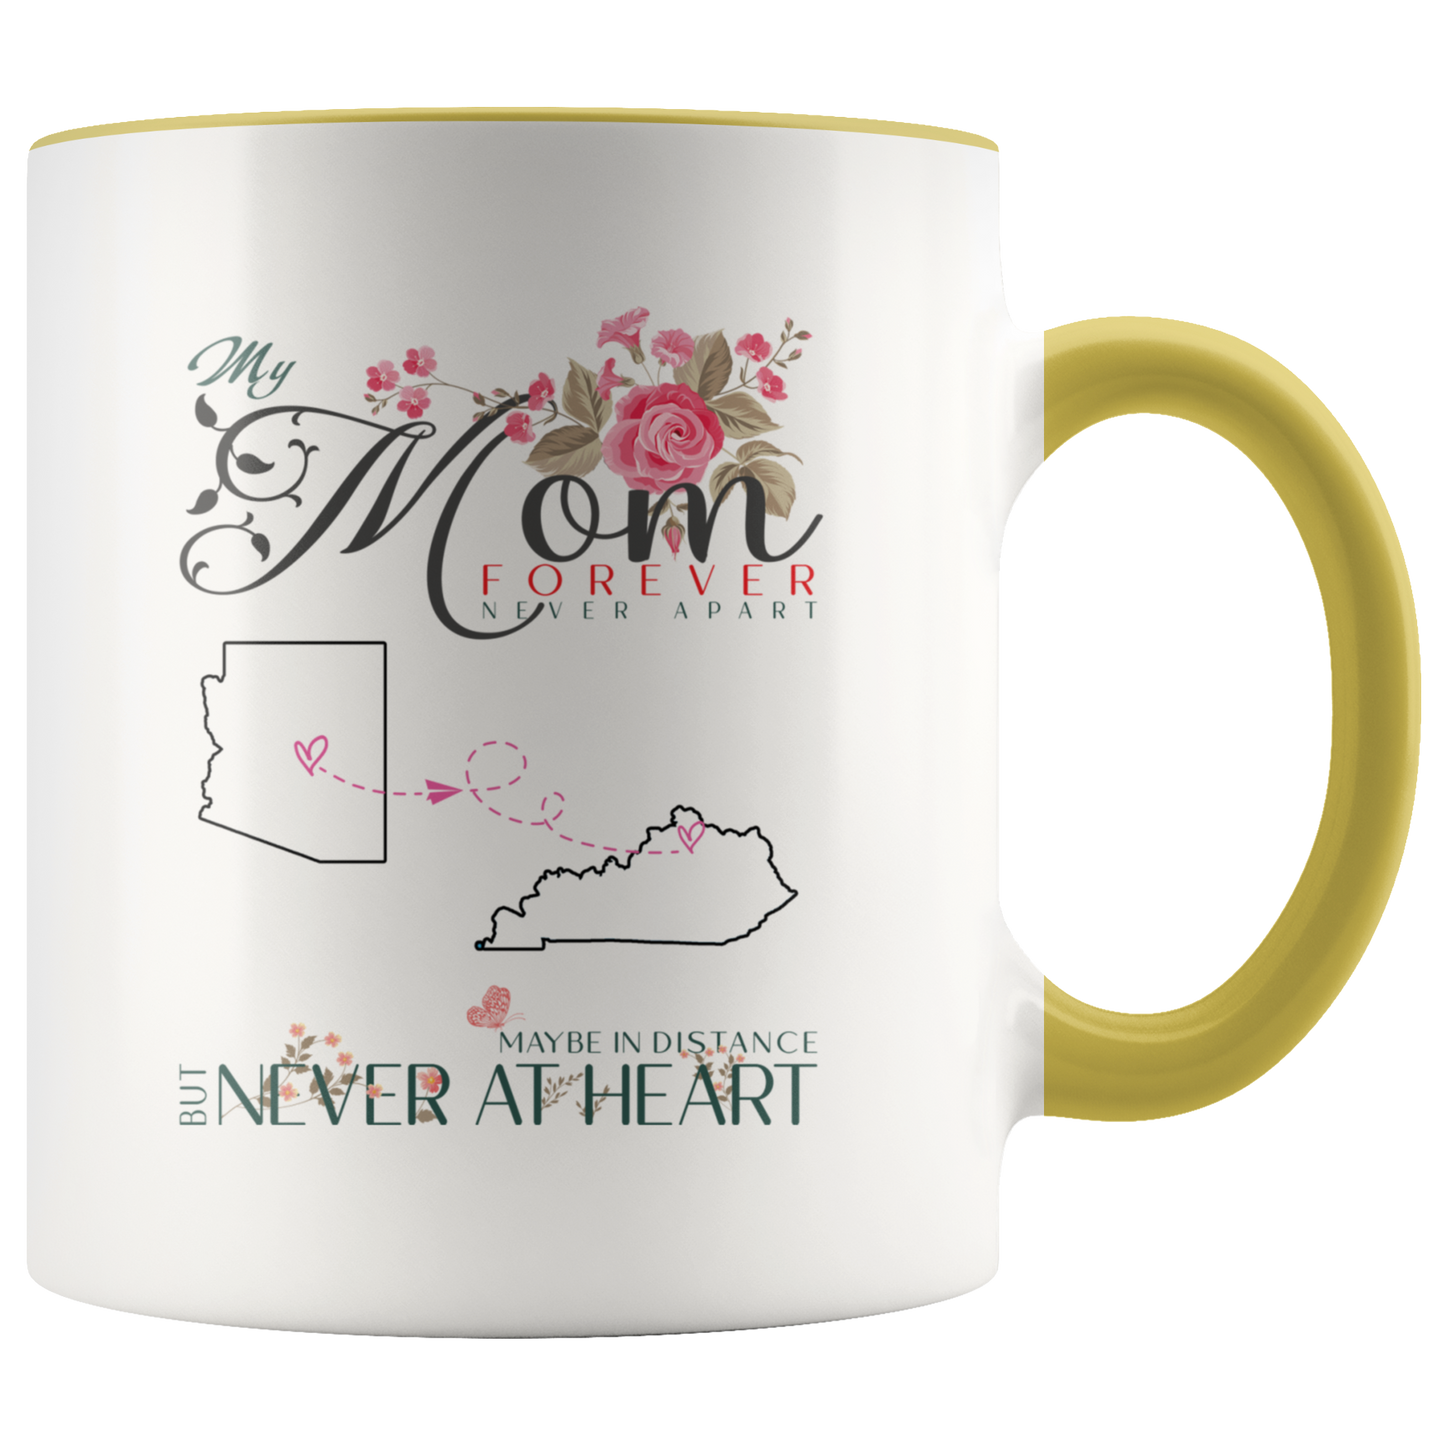 M-20321571-sp-23900 - [ Arizona | Kentucky ]Personalized Mothers Day Coffee Mug - My Mom Forever Never A